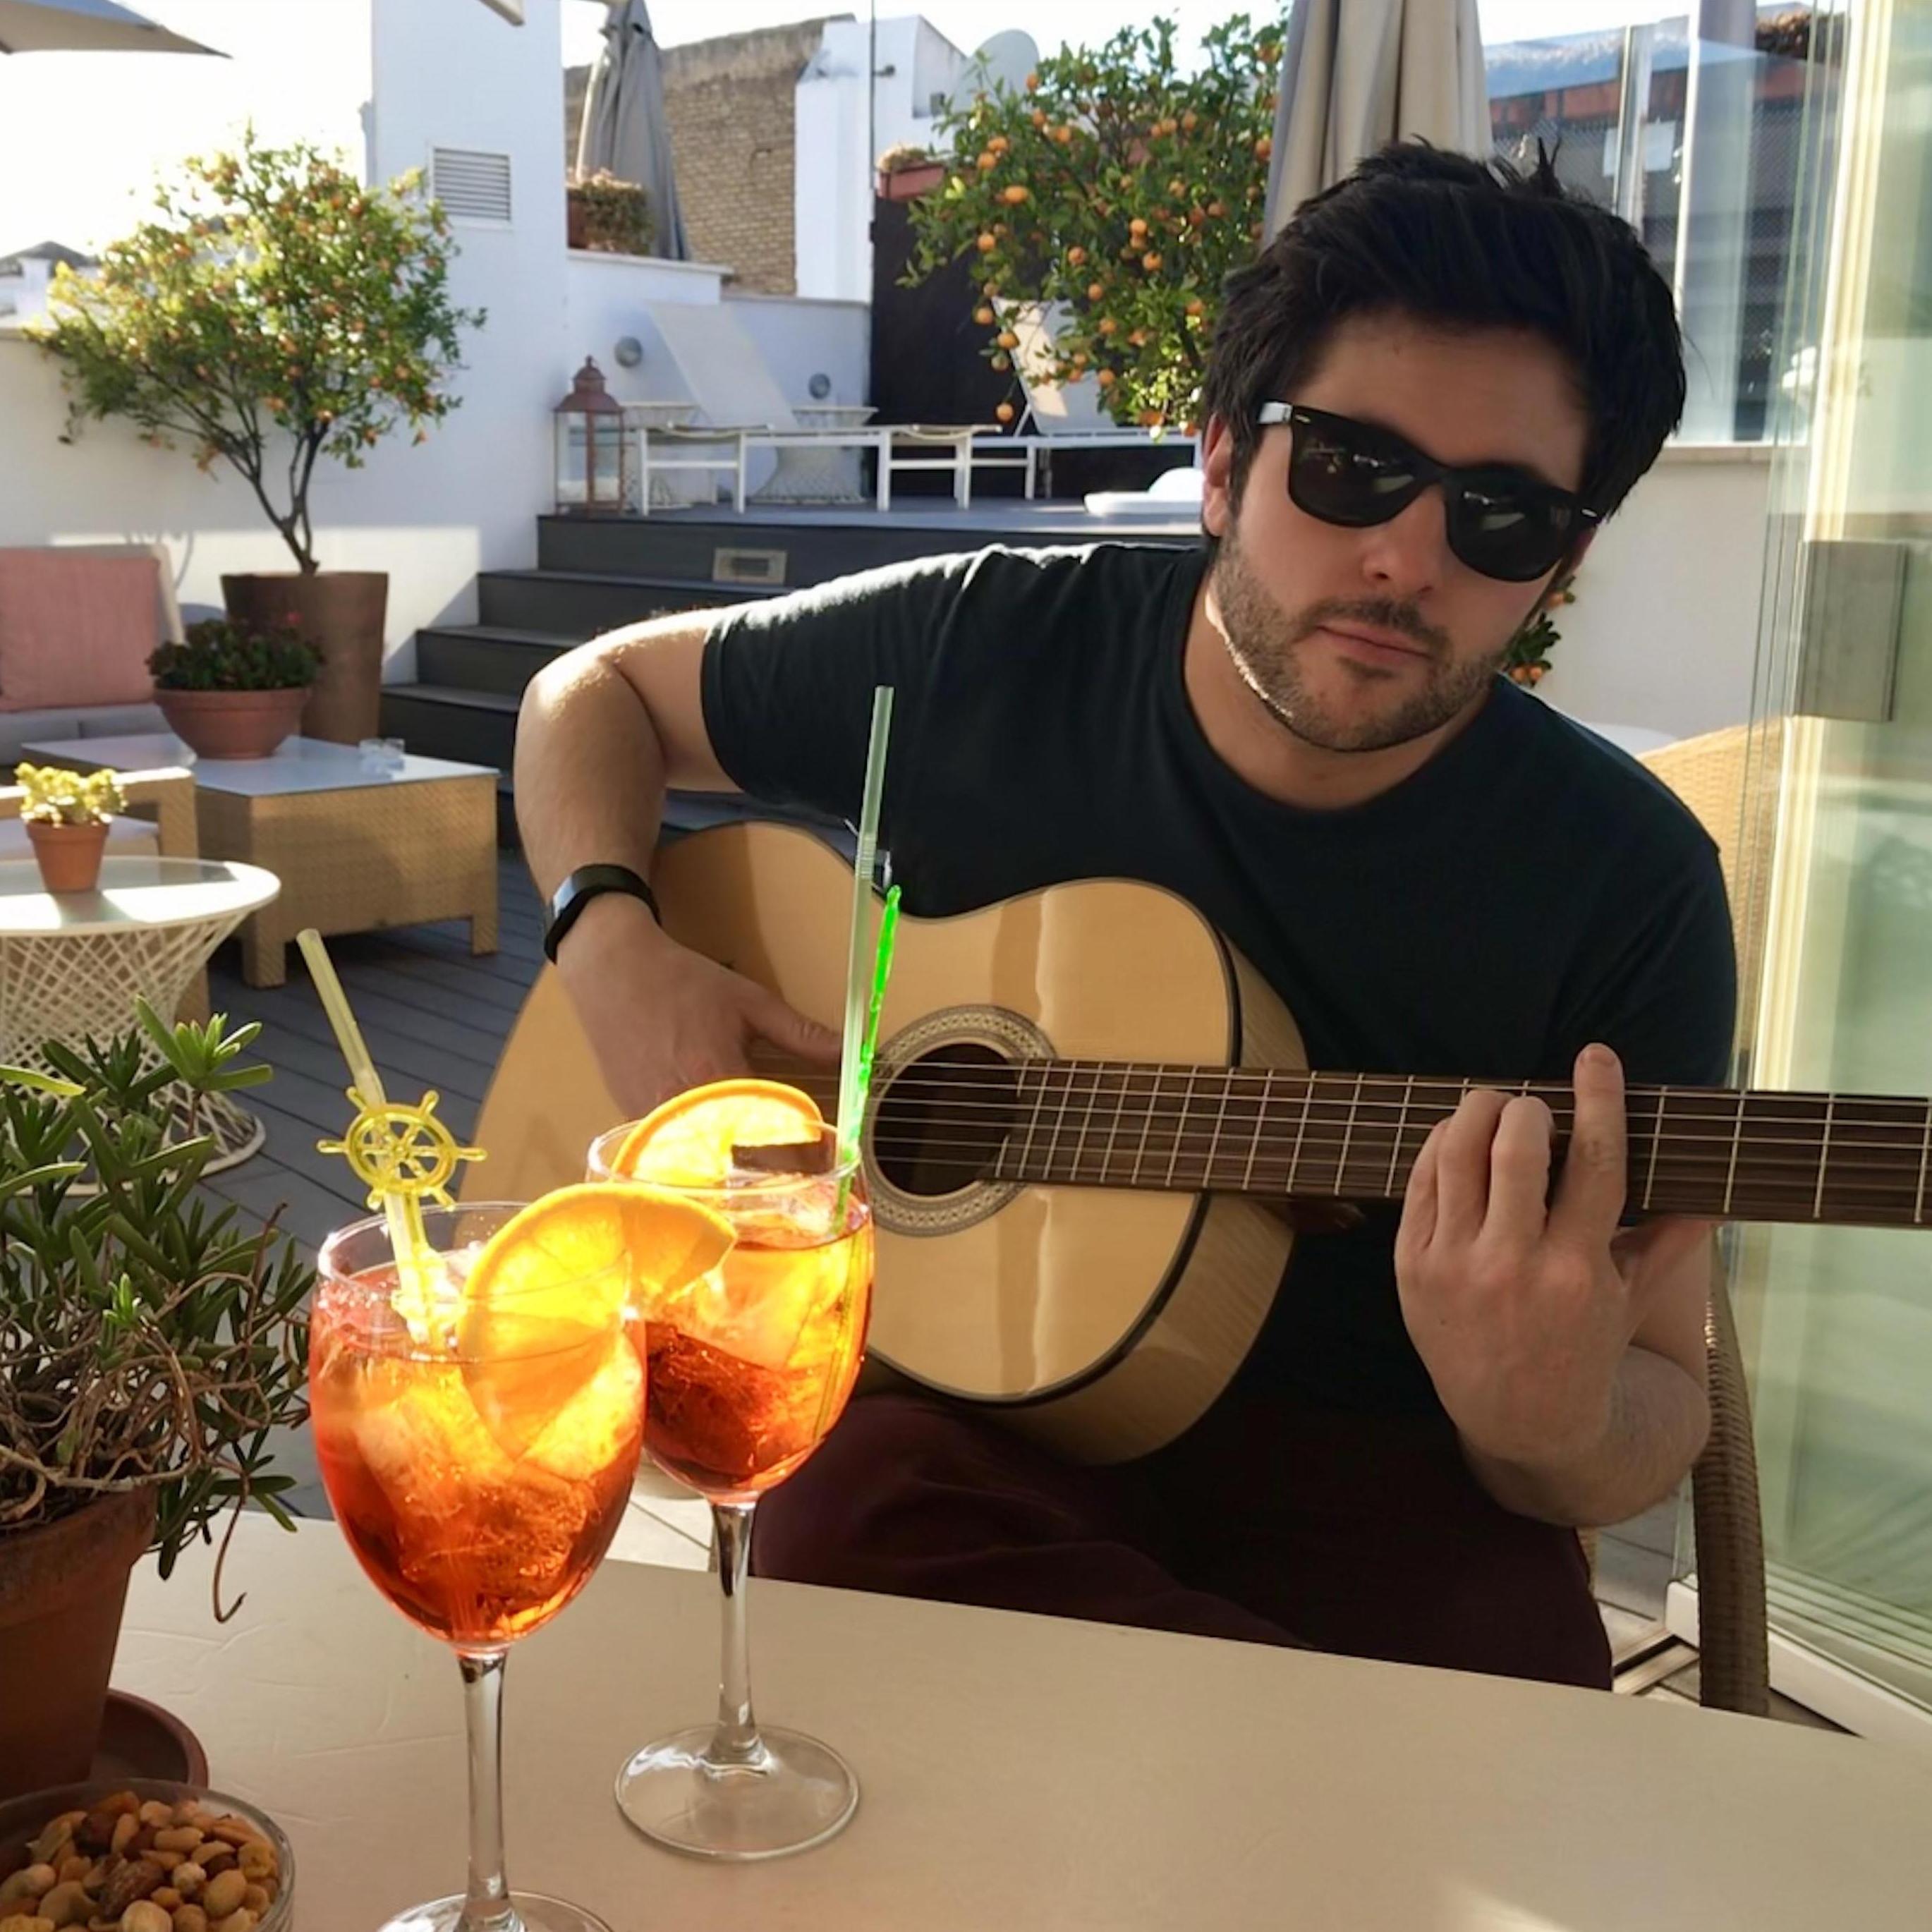 Enjoying rooftop Aperols at Hotel Amadeus in Seville, Spain - instruments in every room for guests to play!
2019